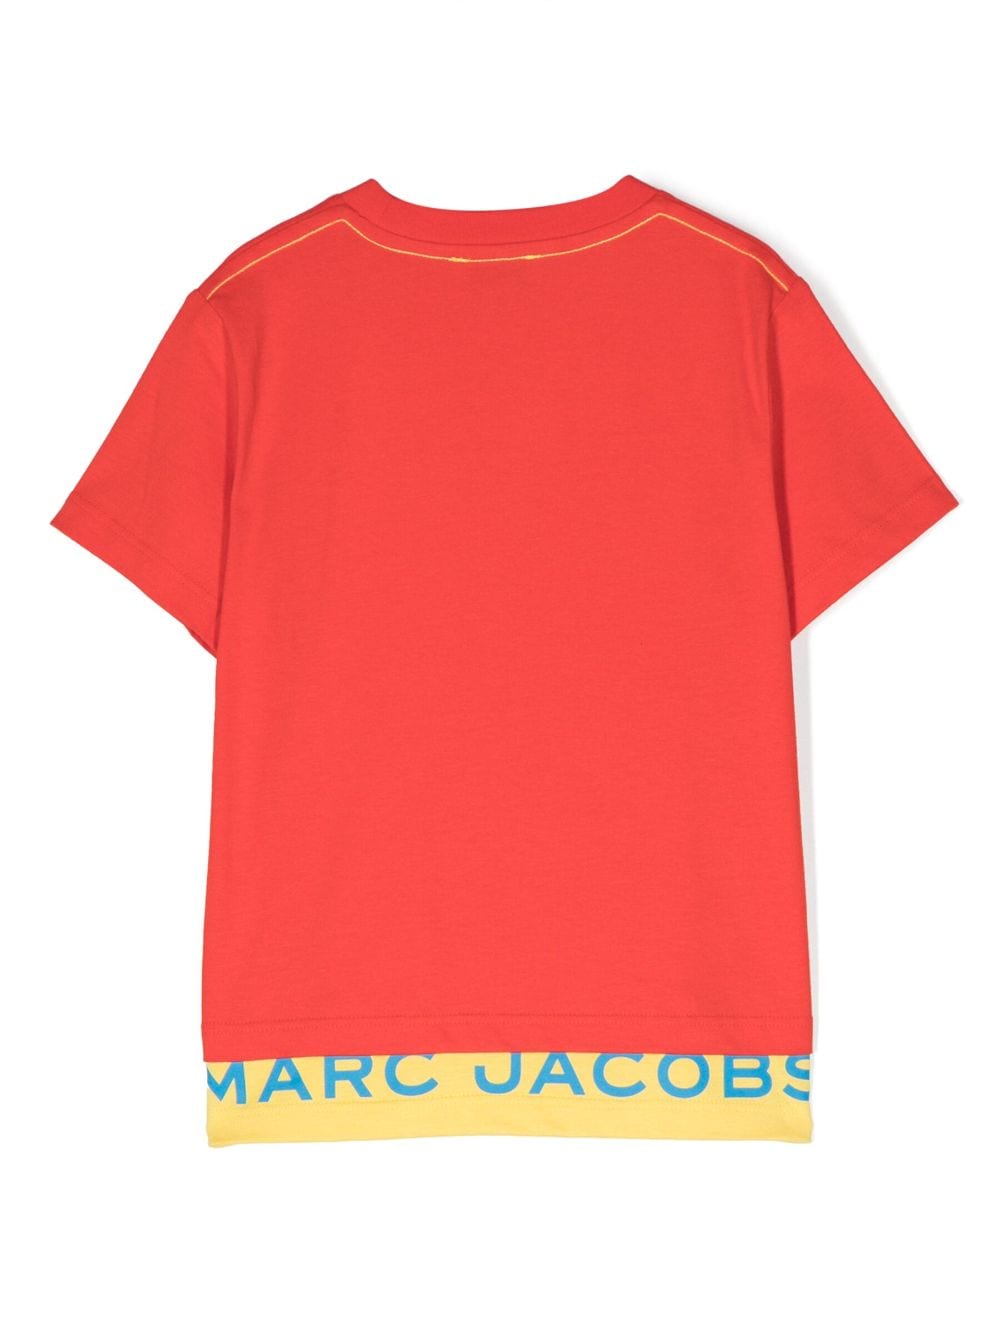 Red with contrasting panels cotton jersey boy MARC JACOBS t-shirt | Carofiglio Junior